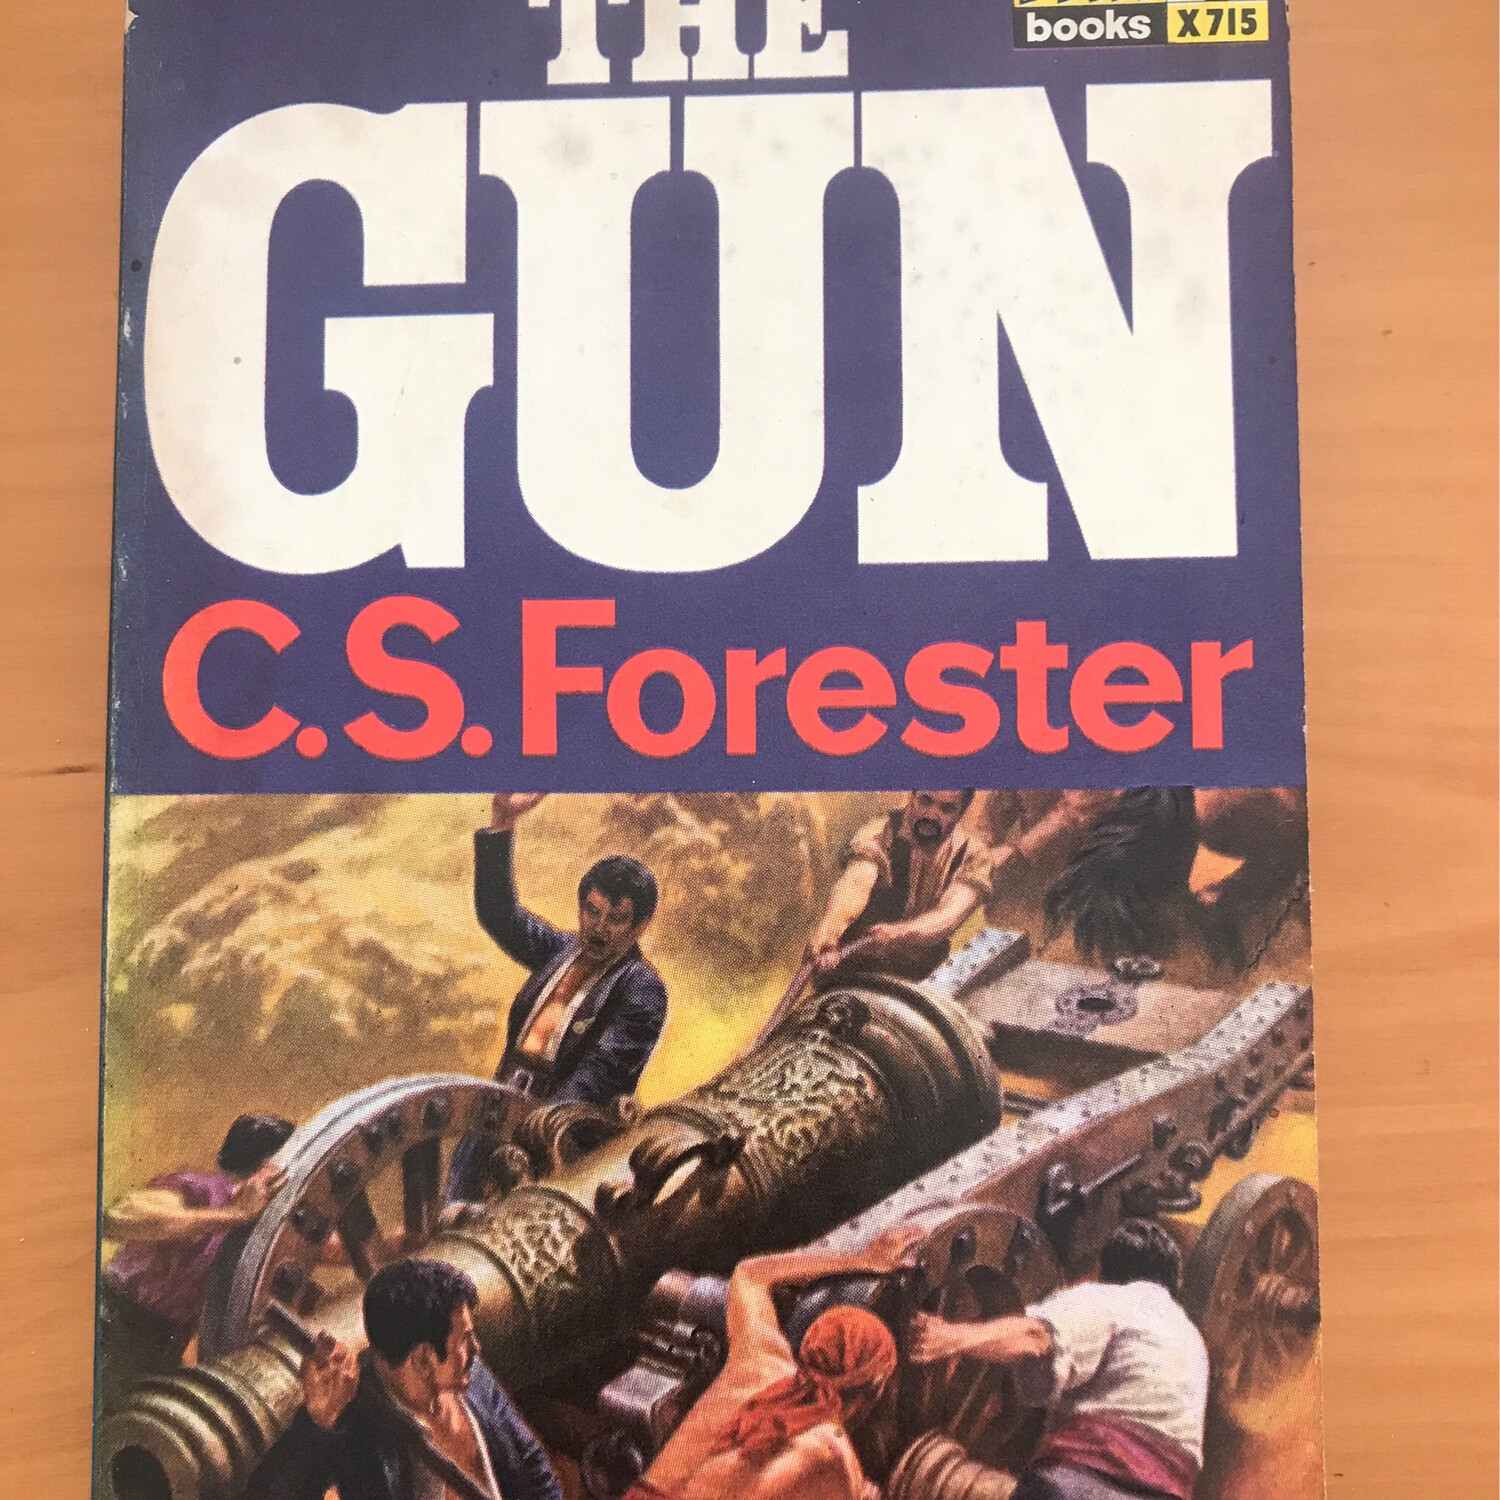 The Gun, C. S. Forester